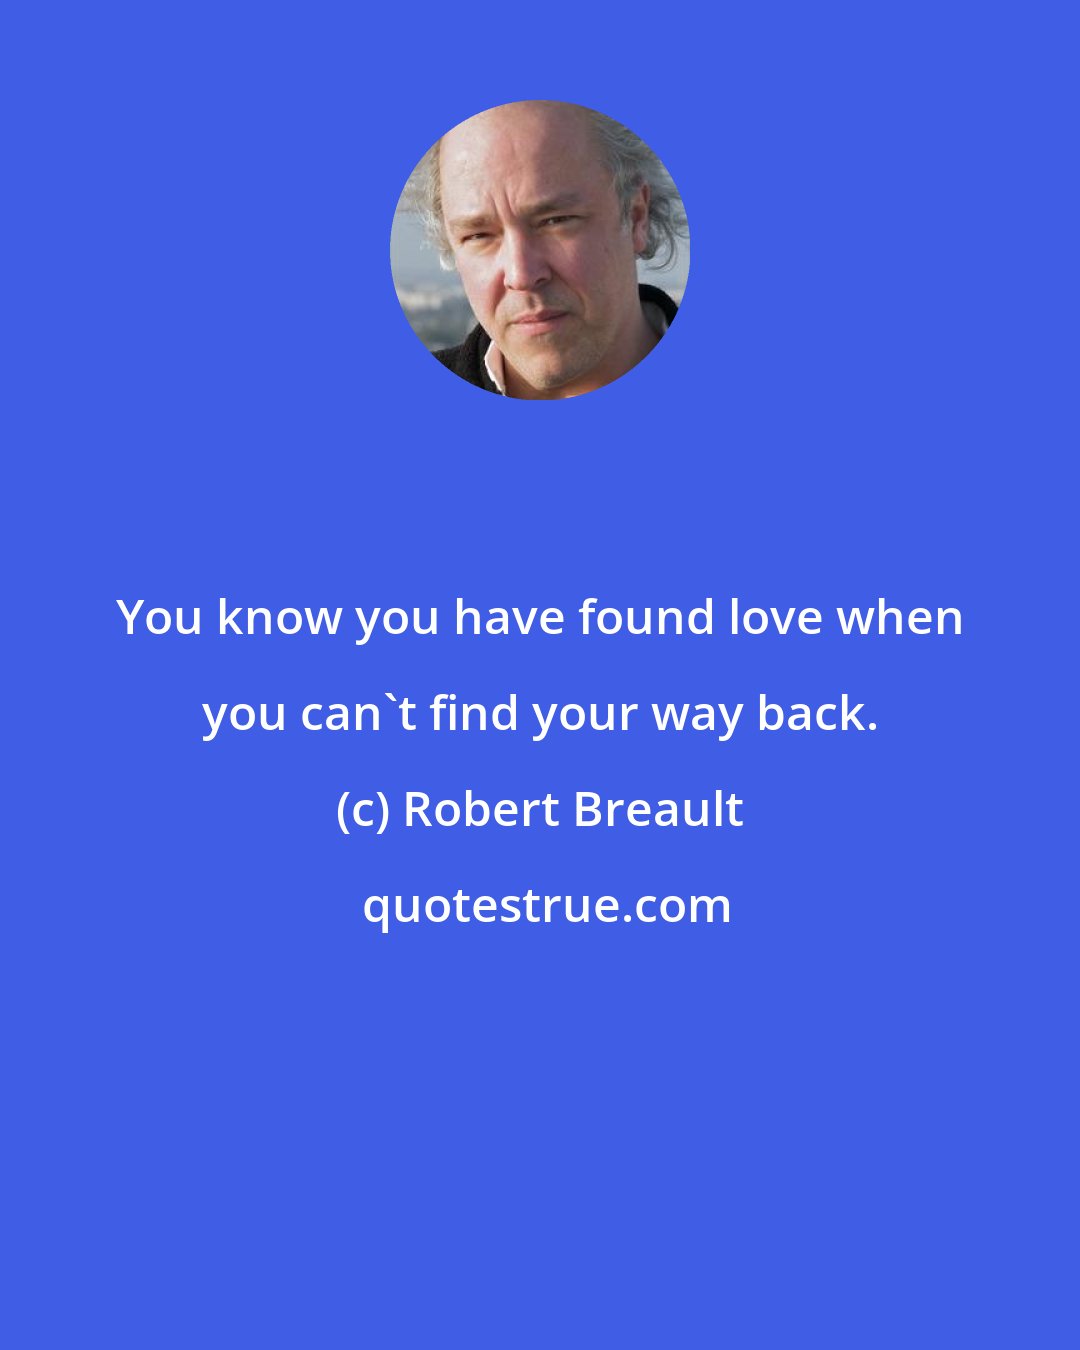 Robert Breault: You know you have found love when you can't find your way back.